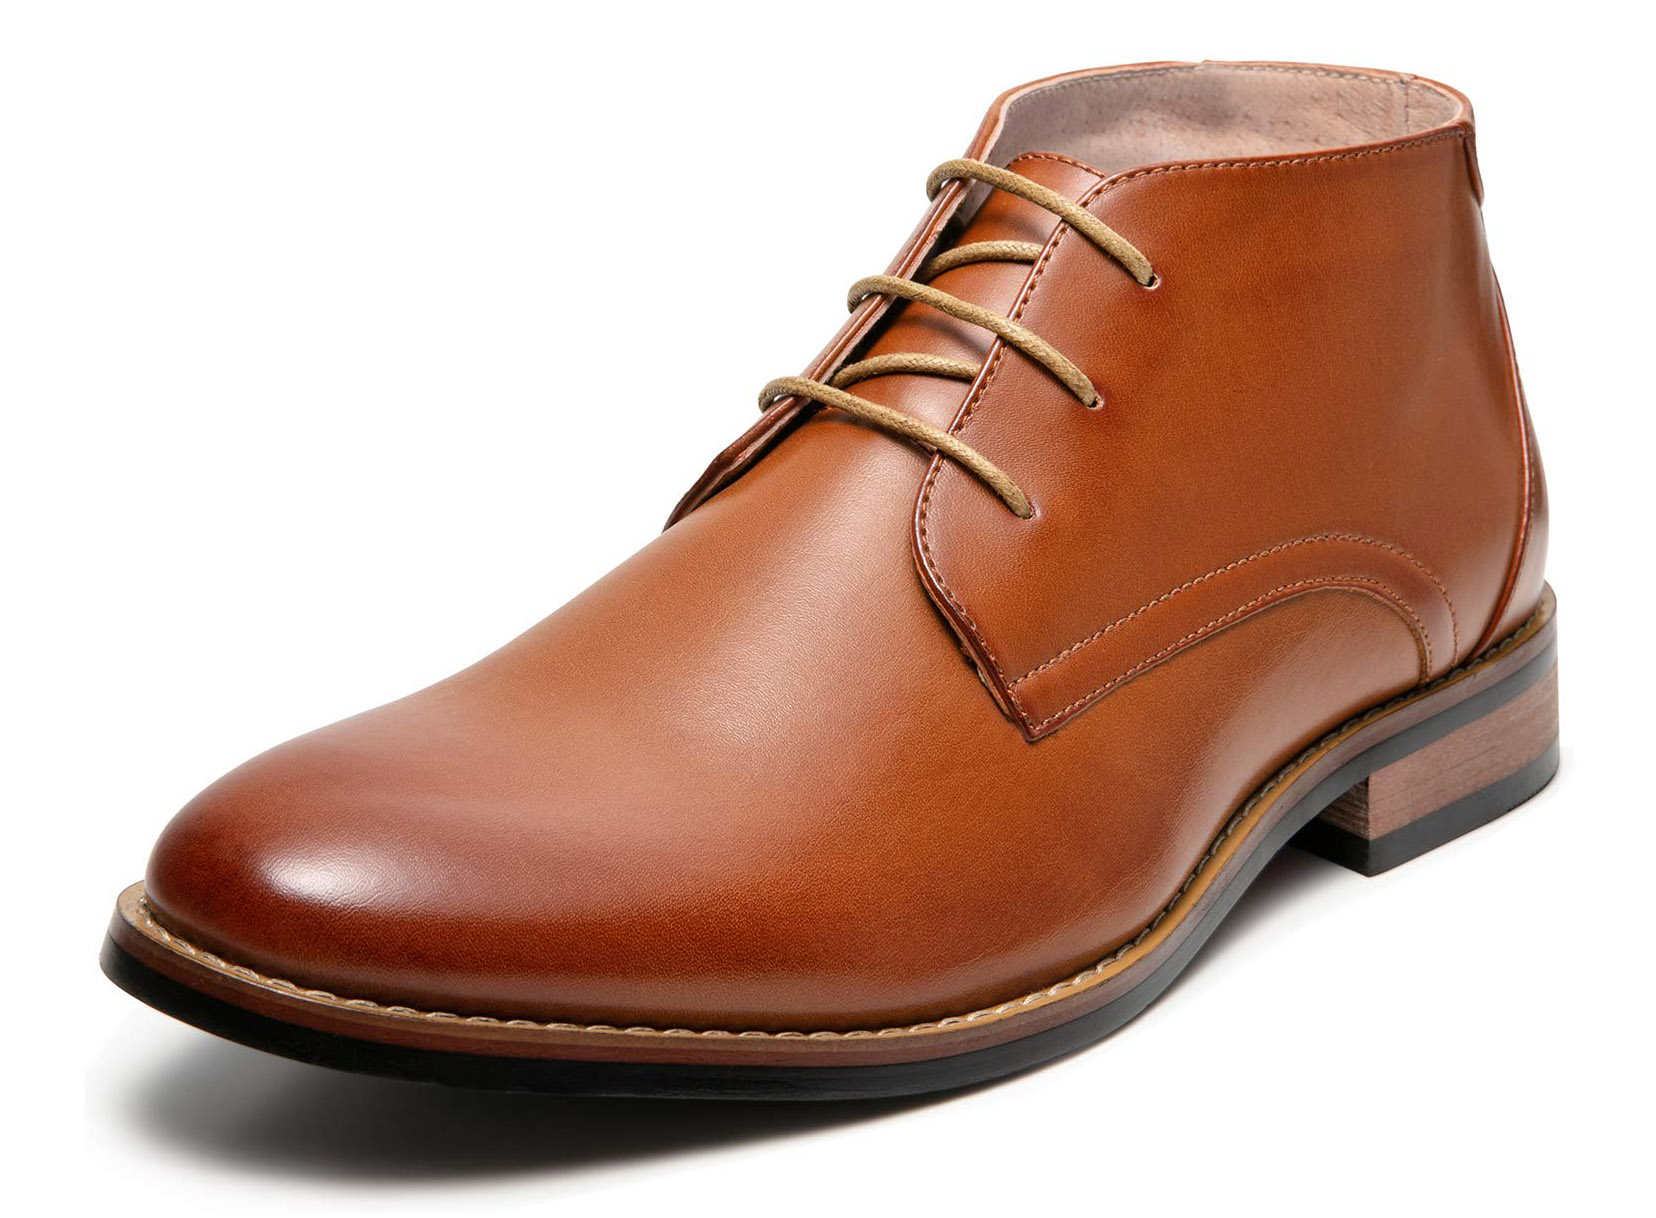 The 16 Best Dress Shoes Under $100 To Keep You Looking Sharp Without ...